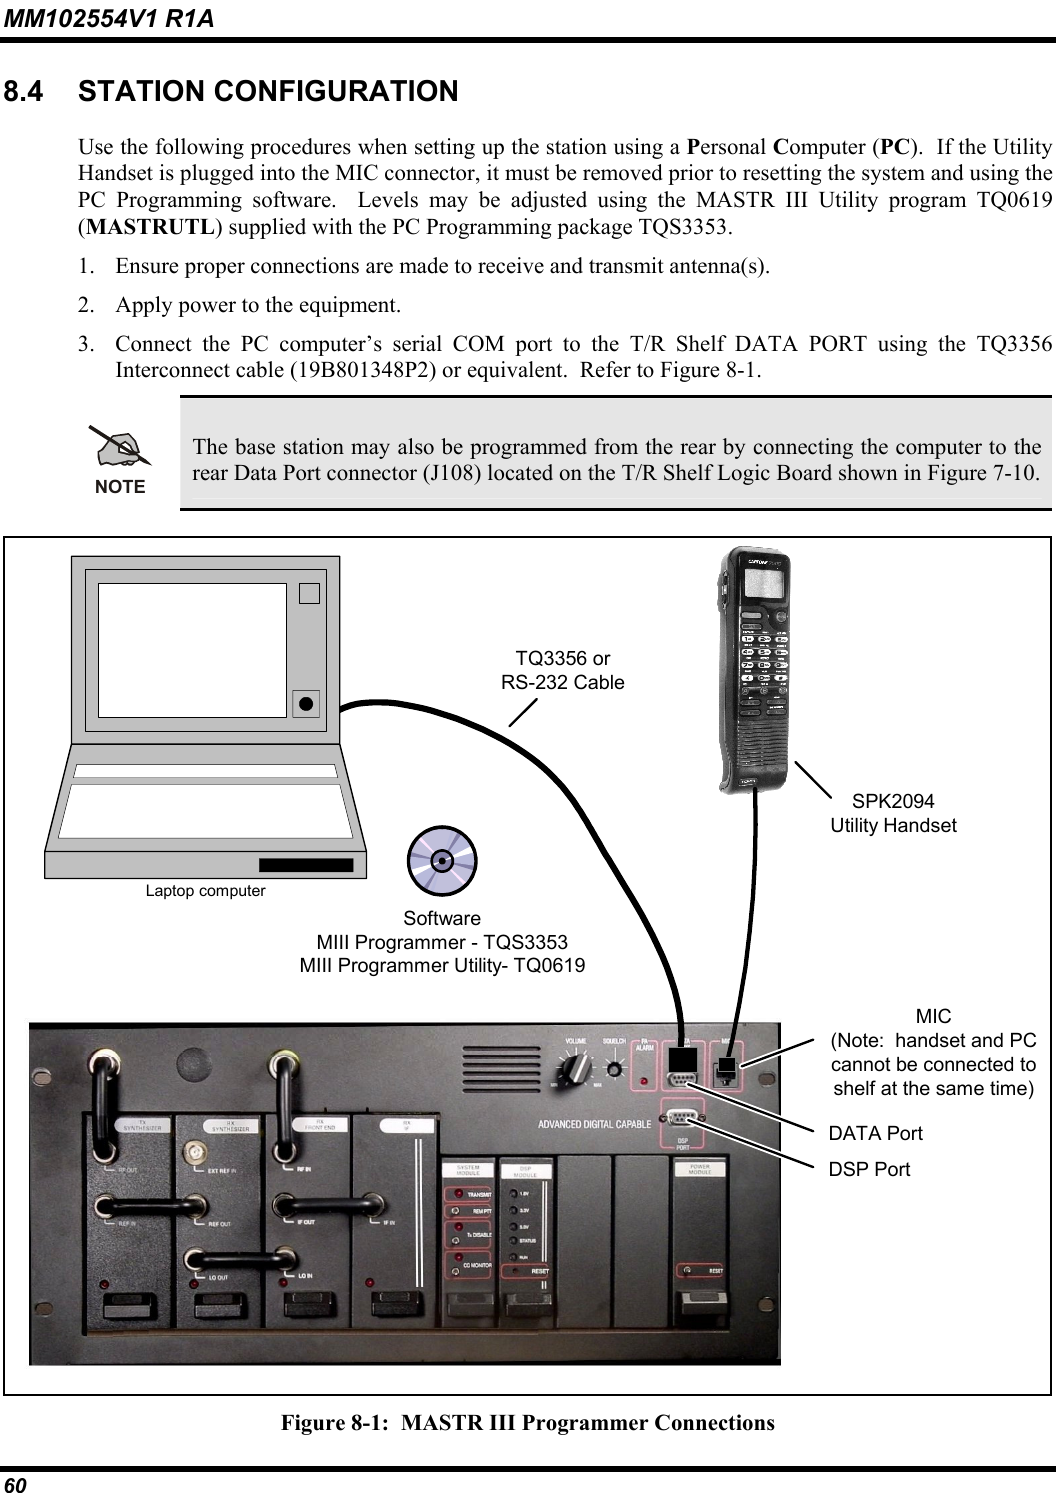 MM102554V1 R1A 60   8.4 STATION CONFIGURATION Use the following procedures when setting up the station using a Personal Computer (PC).  If the Utility Handset is plugged into the MIC connector, it must be removed prior to resetting the system and using the PC Programming software.  Levels may be adjusted using the MASTR III Utility program TQ0619 (MASTRUTL) supplied with the PC Programming package TQS3353.   1.  Ensure proper connections are made to receive and transmit antenna(s).  2.  Apply power to the equipment. 3.  Connect the PC computer’s serial COM port to the T/R Shelf DATA PORT using the TQ3356 Interconnect cable (19B801348P2) or equivalent.  Refer to Figure 8-1. NOTE The base station may also be programmed from the rear by connecting the computer to the rear Data Port connector (J108) located on the T/R Shelf Logic Board shown in Figure 7-10.  TQ3356 orRS-232 CableSPK2094Utility HandsetMIC(Note:  handset and PCcannot be connected toshelf at the same time)DATA PortDSP PortLaptop computerSoftwareMIII Programmer - TQS3353MIII Programmer Utility- TQ0619 Figure 8-1:  MASTR III Programmer Connections 